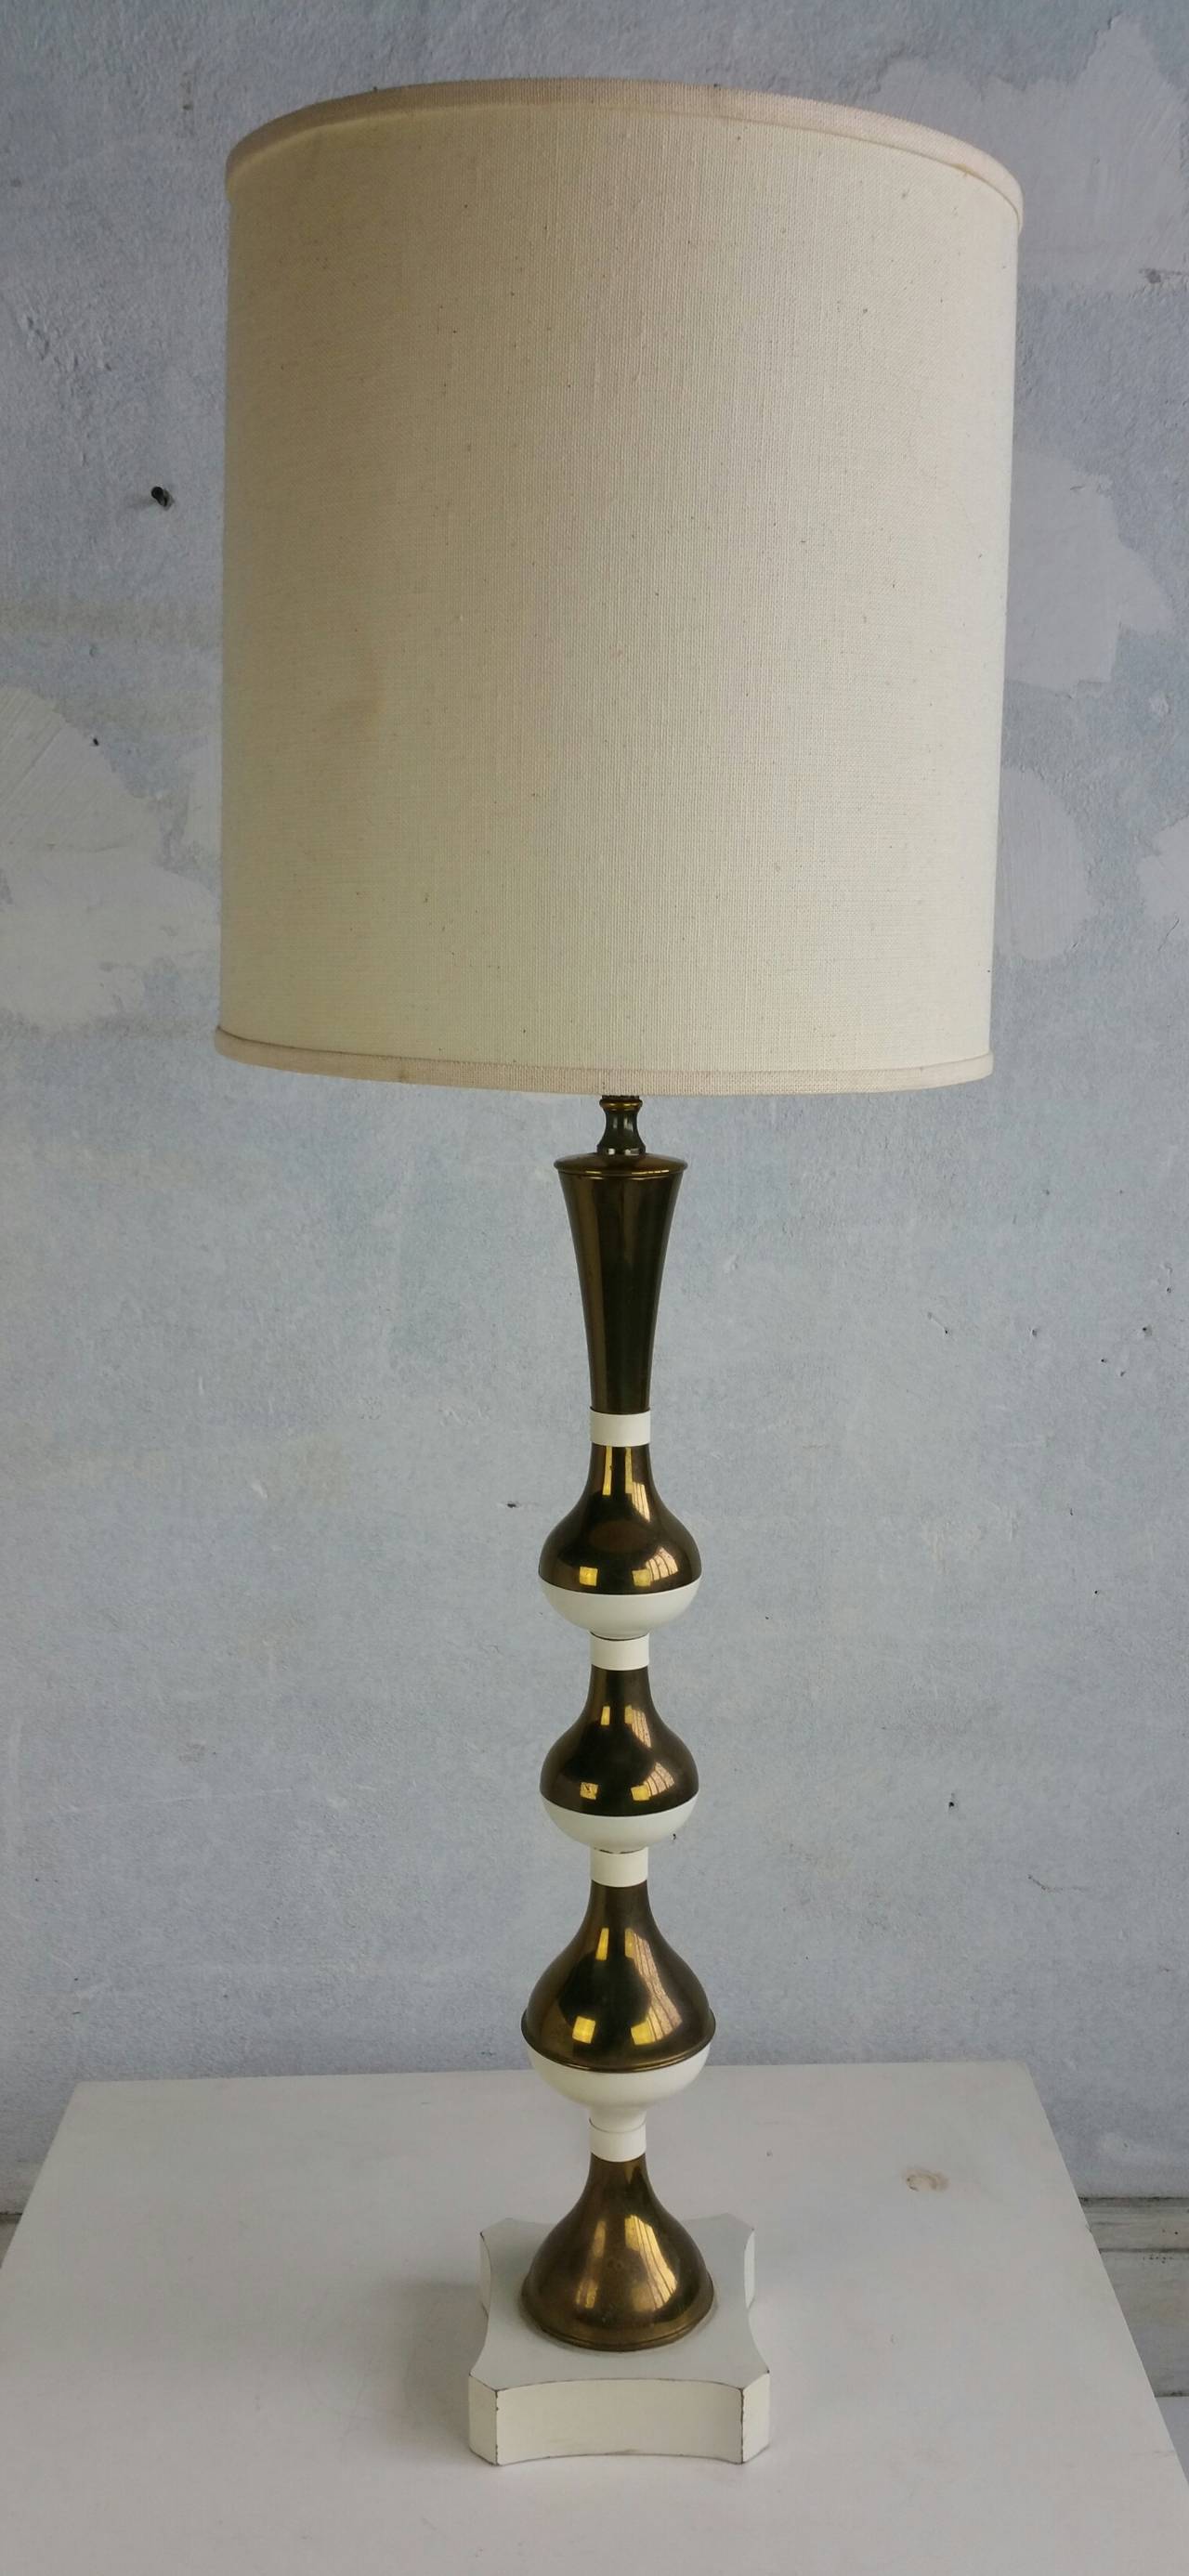 Tall Mid Century Modern Table Lamp. Strong presence. Very dramatic. Manner of Tommi Parzinger. Nice quality. Brass and White Lacquer.